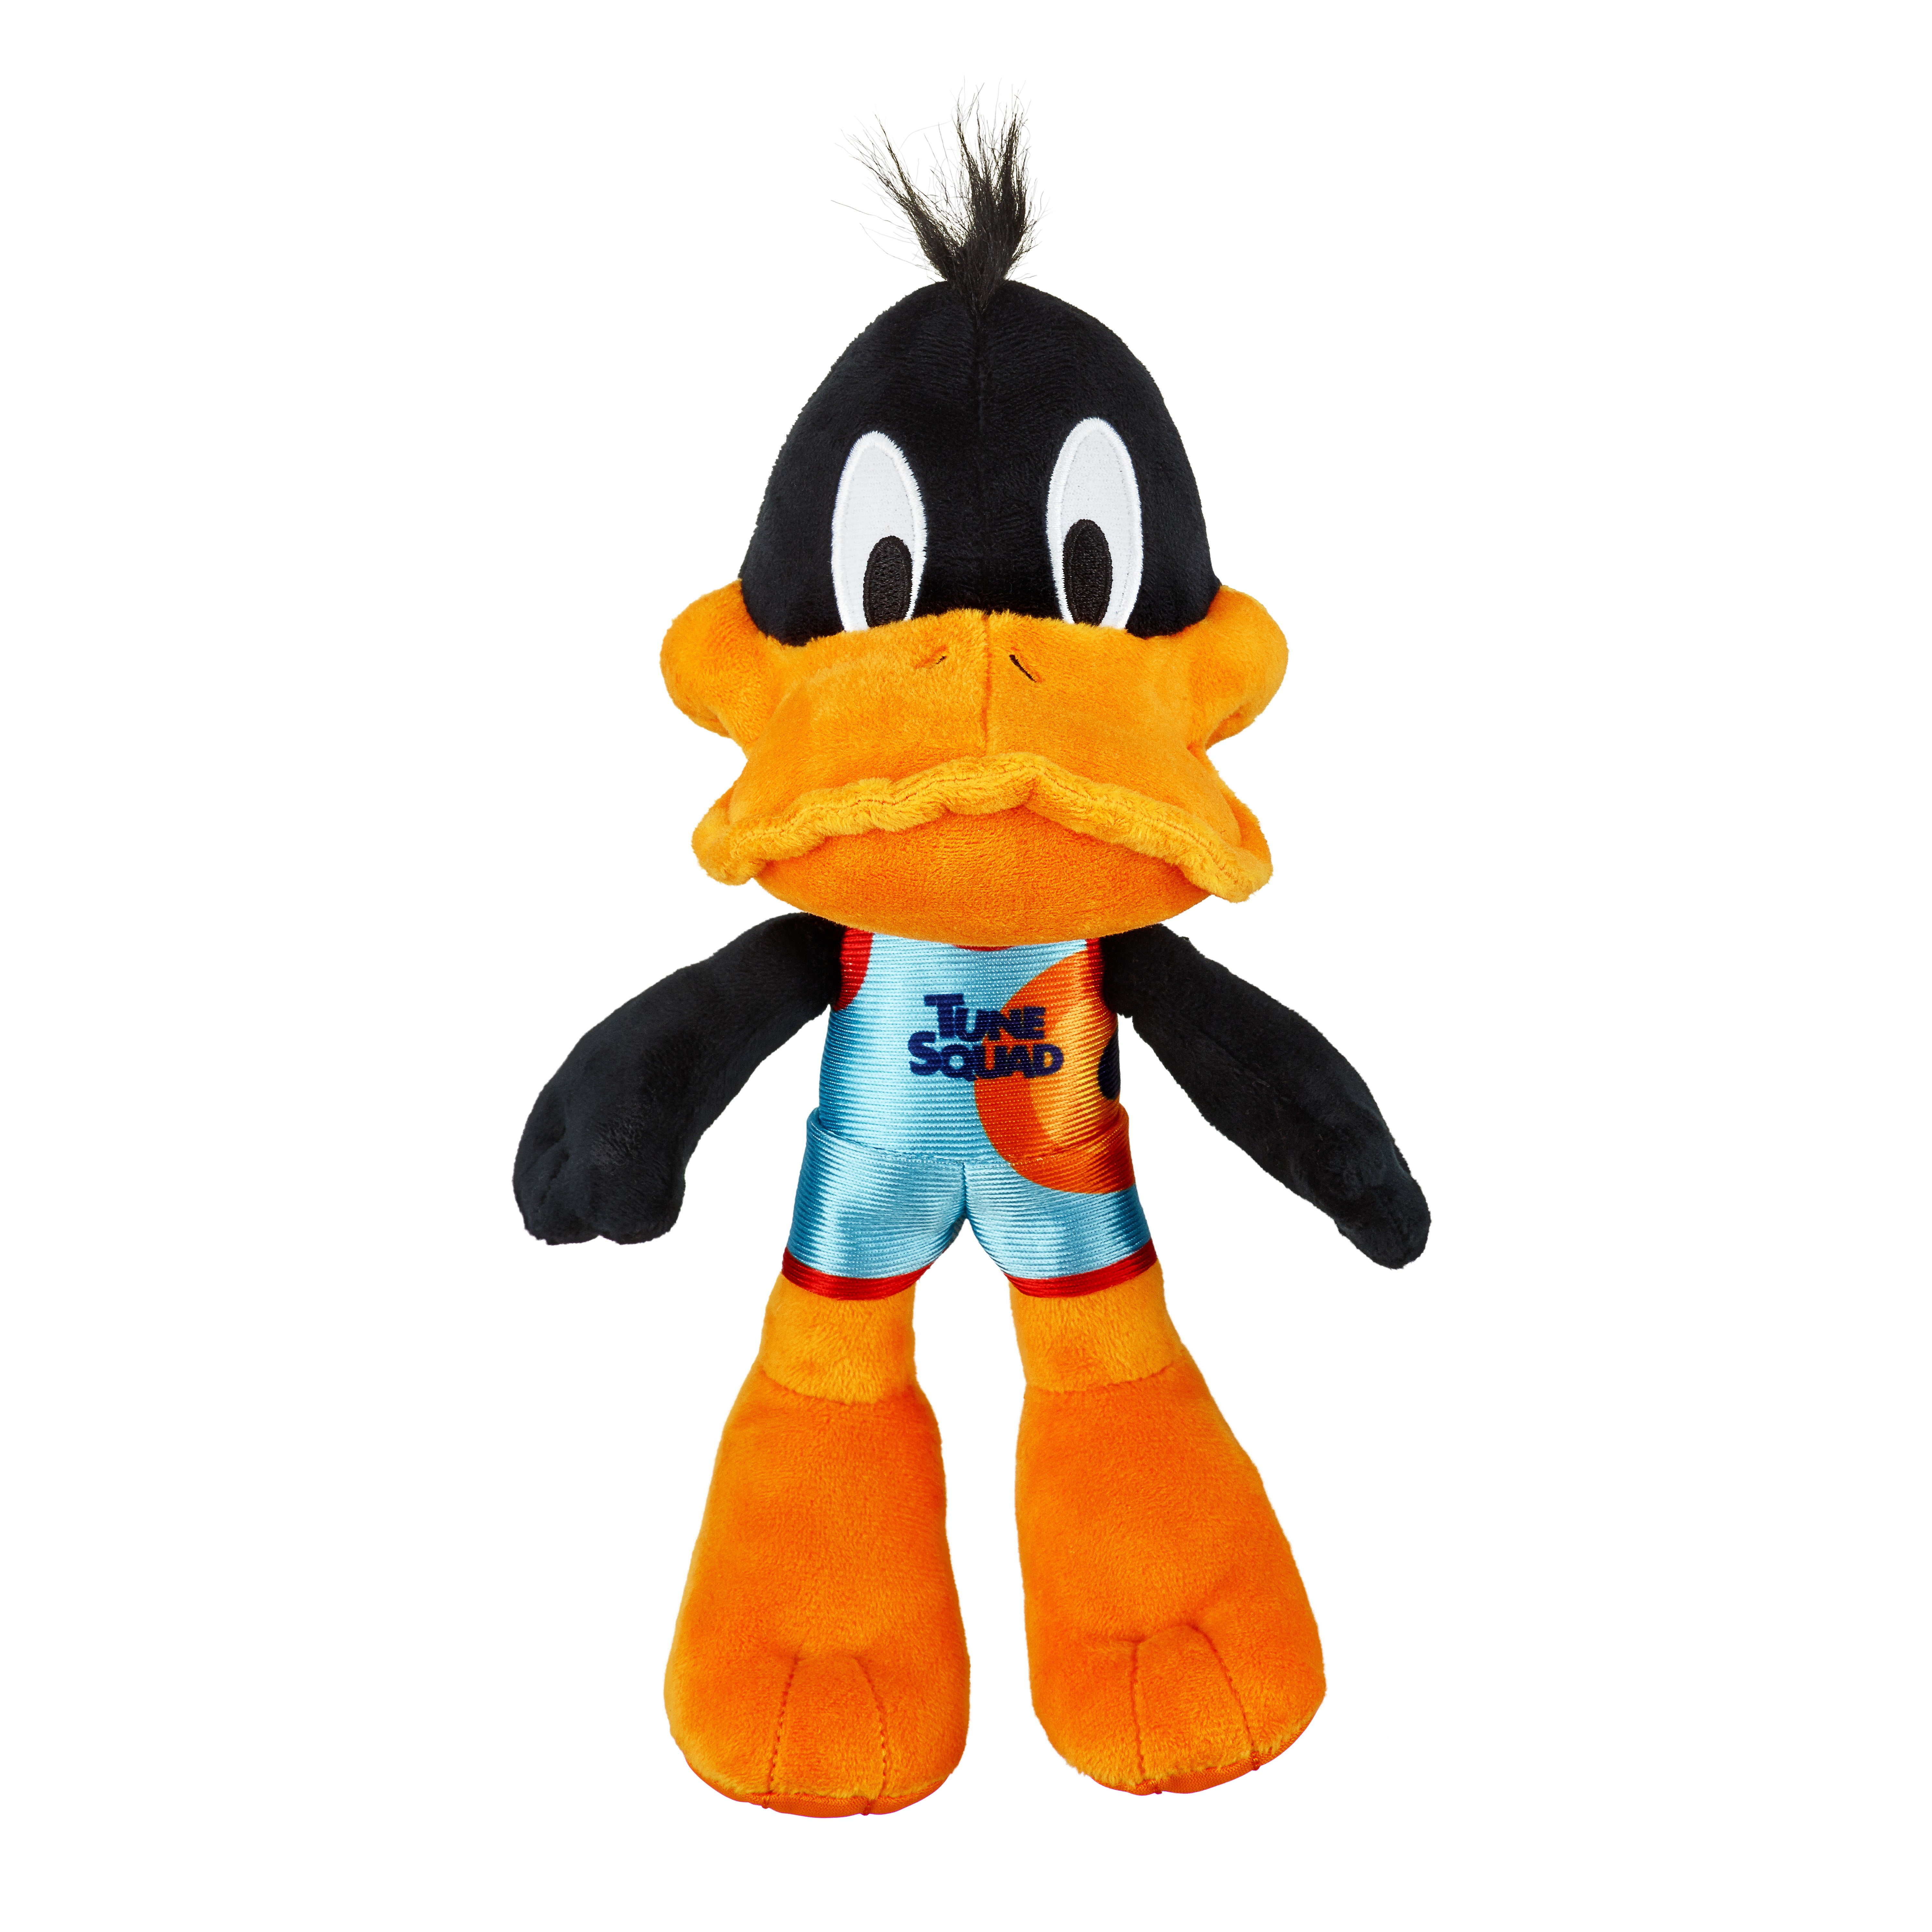 BRAND NEW LOONEY TUNES DAFFY DUCK PLUSH 12INCH SOFT TOY TUNE SQUAD SPACE JAM 